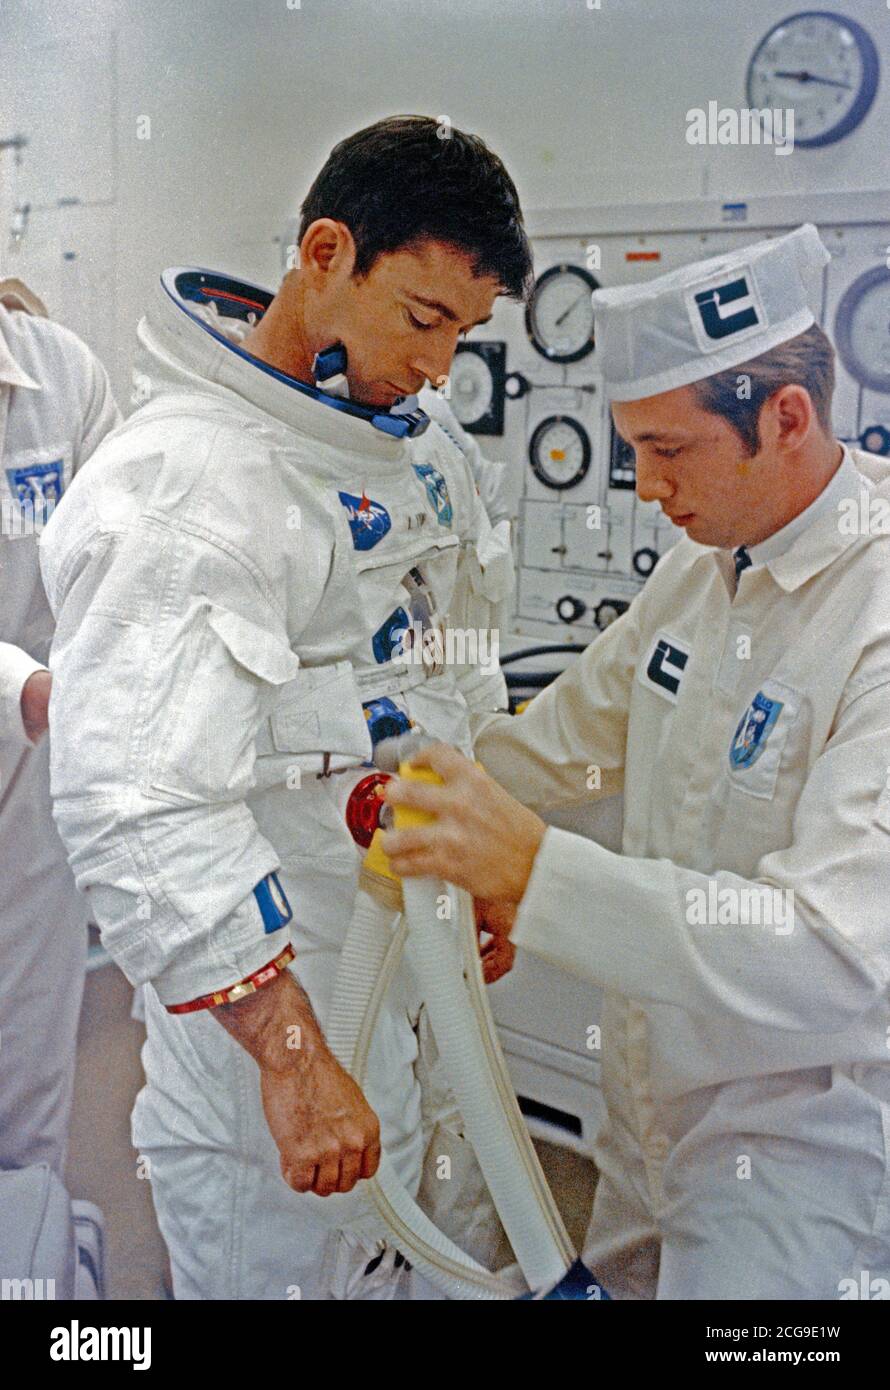 (18 May 1969) --- A technician attaches hose from test stand to spacesuit of astronaut John W. Young, Apollo 10 command module pilot, during final suiting operations for the Apollo 10 lunar orbit mission. Stock Photo